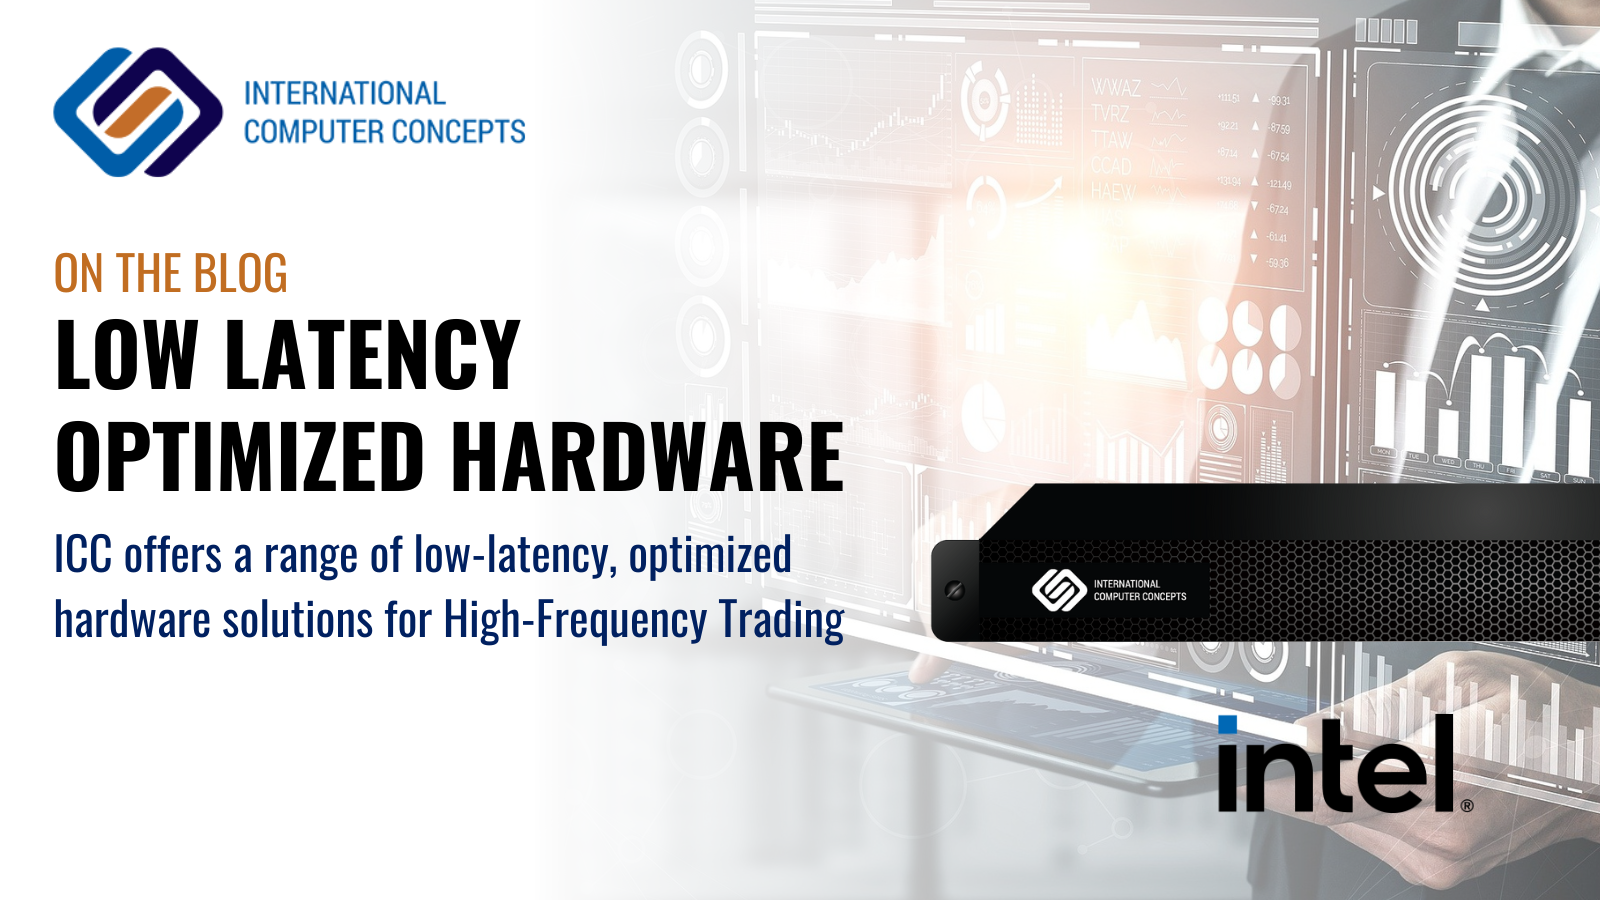 Low Latency Optimized Hardware for High Frequency Trading